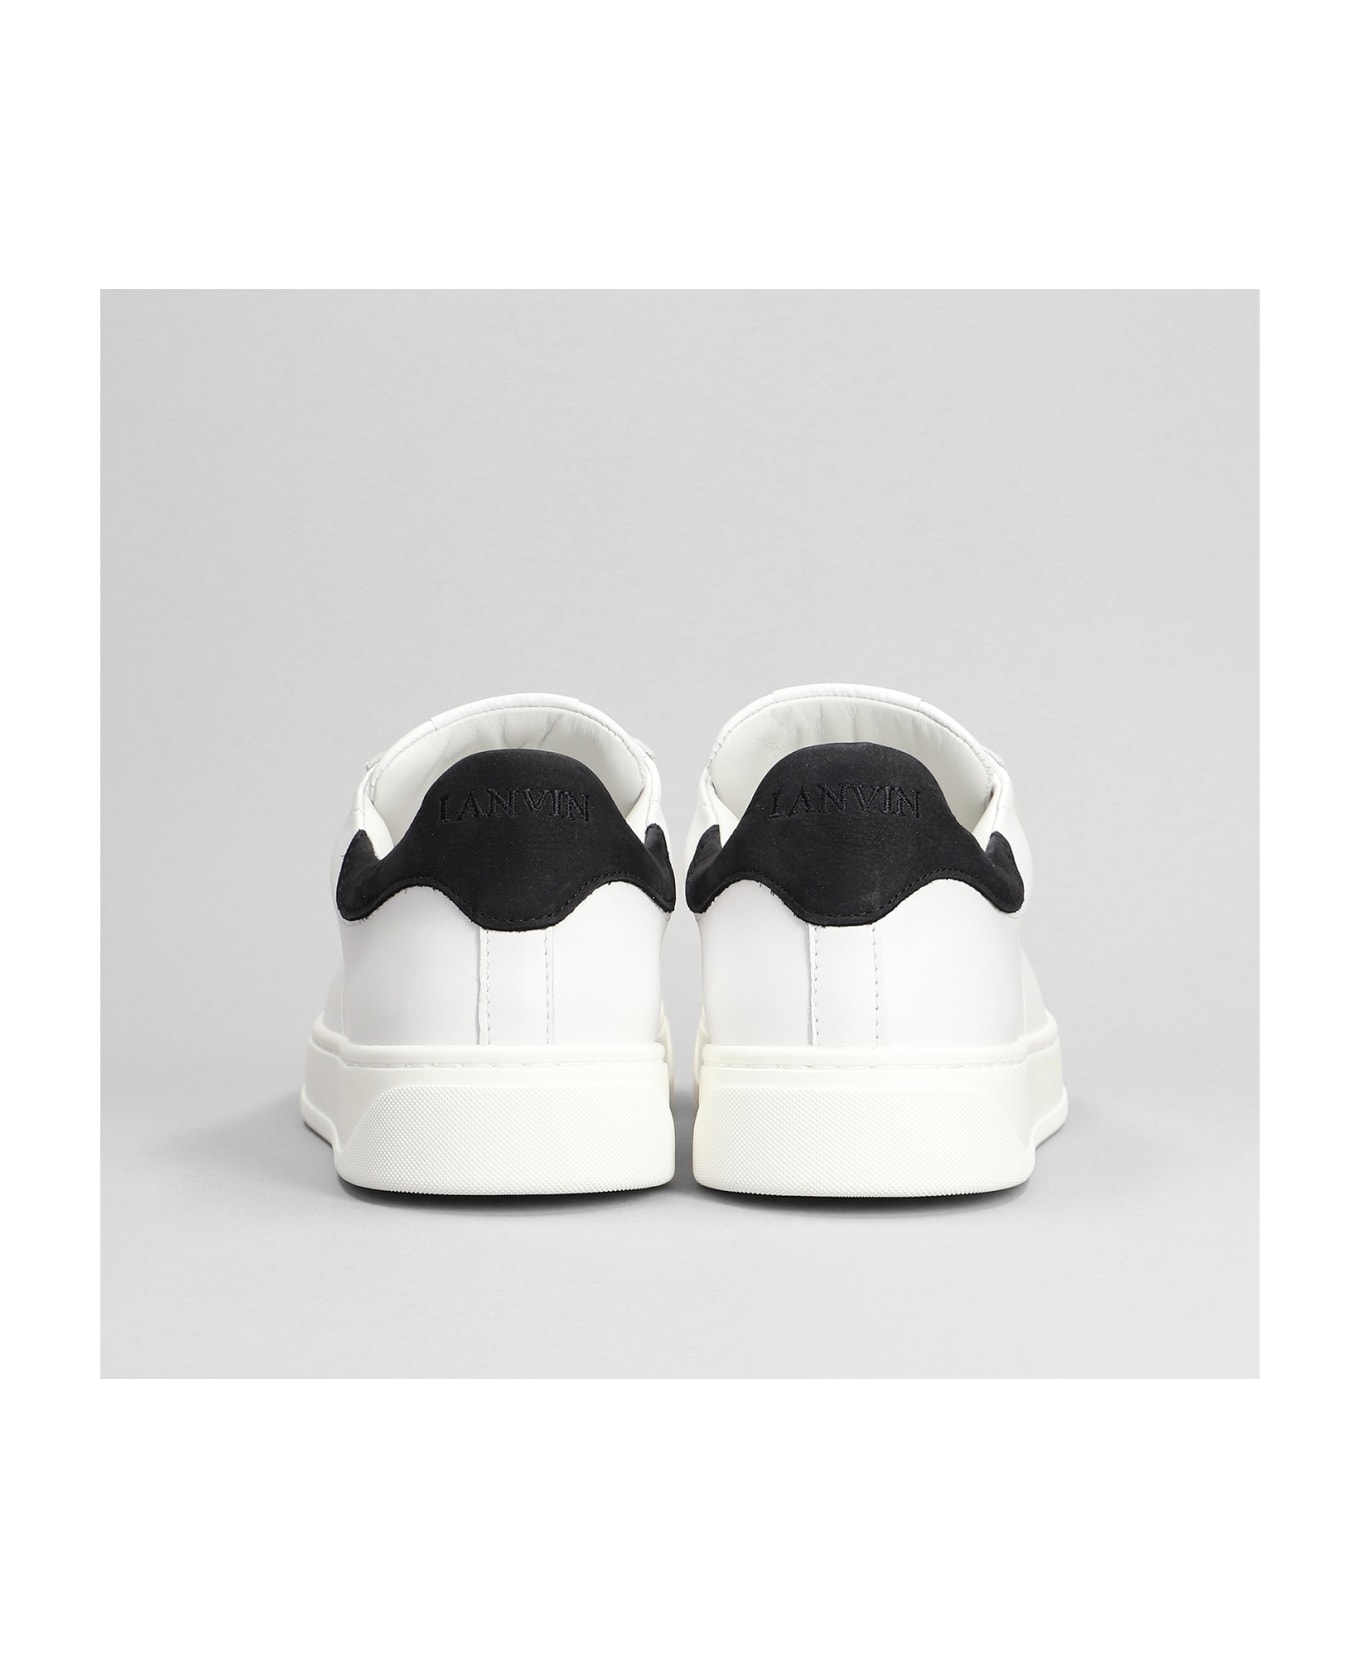 Lanvin Ddb0 Sneakers In White Leather - white